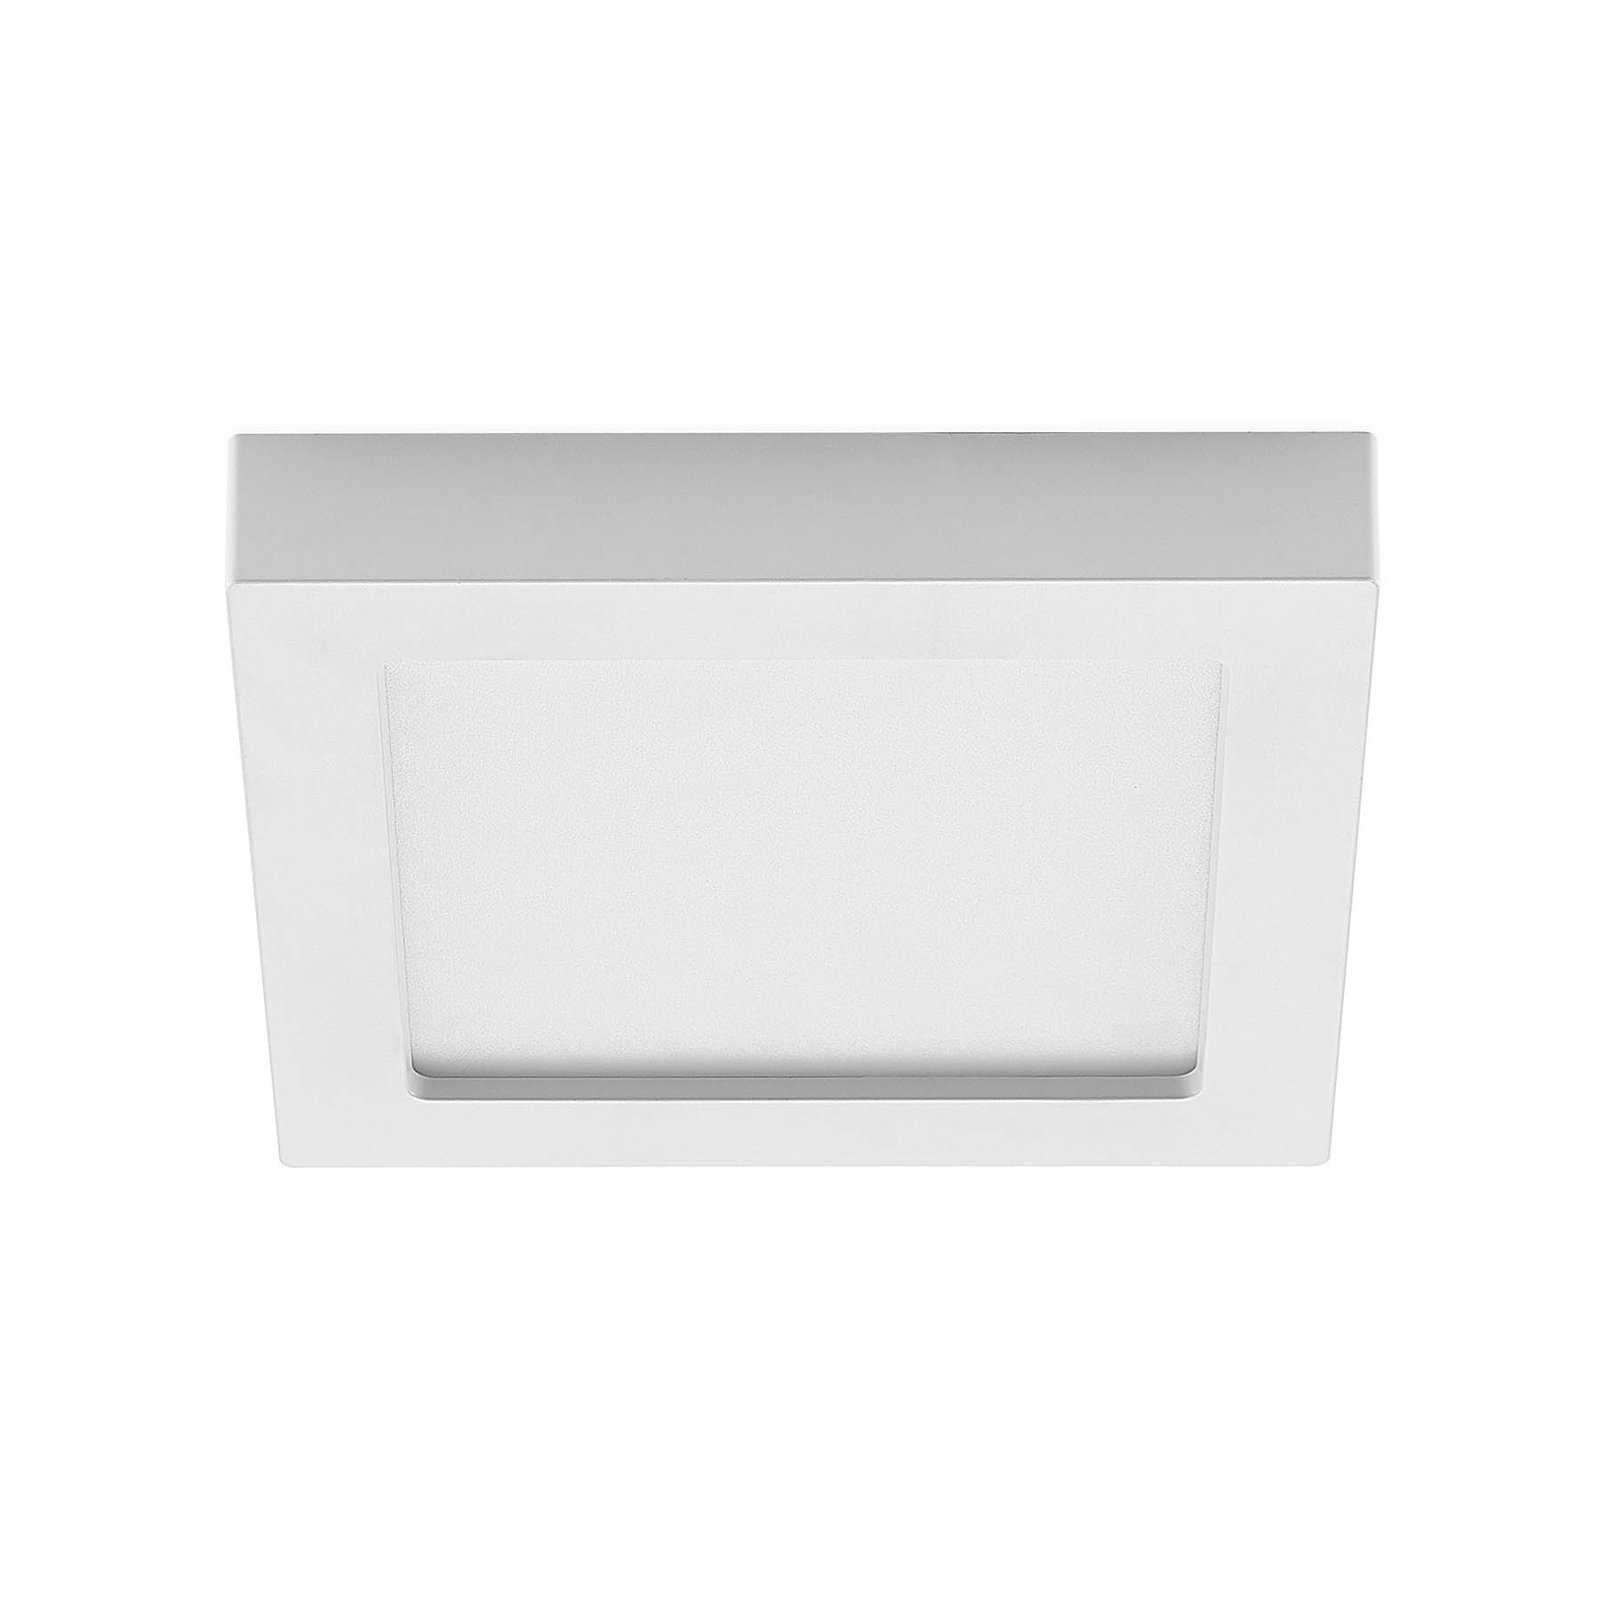 Prios LED ceiling light Alette, white, 22.7 cm, 18W, dimmable